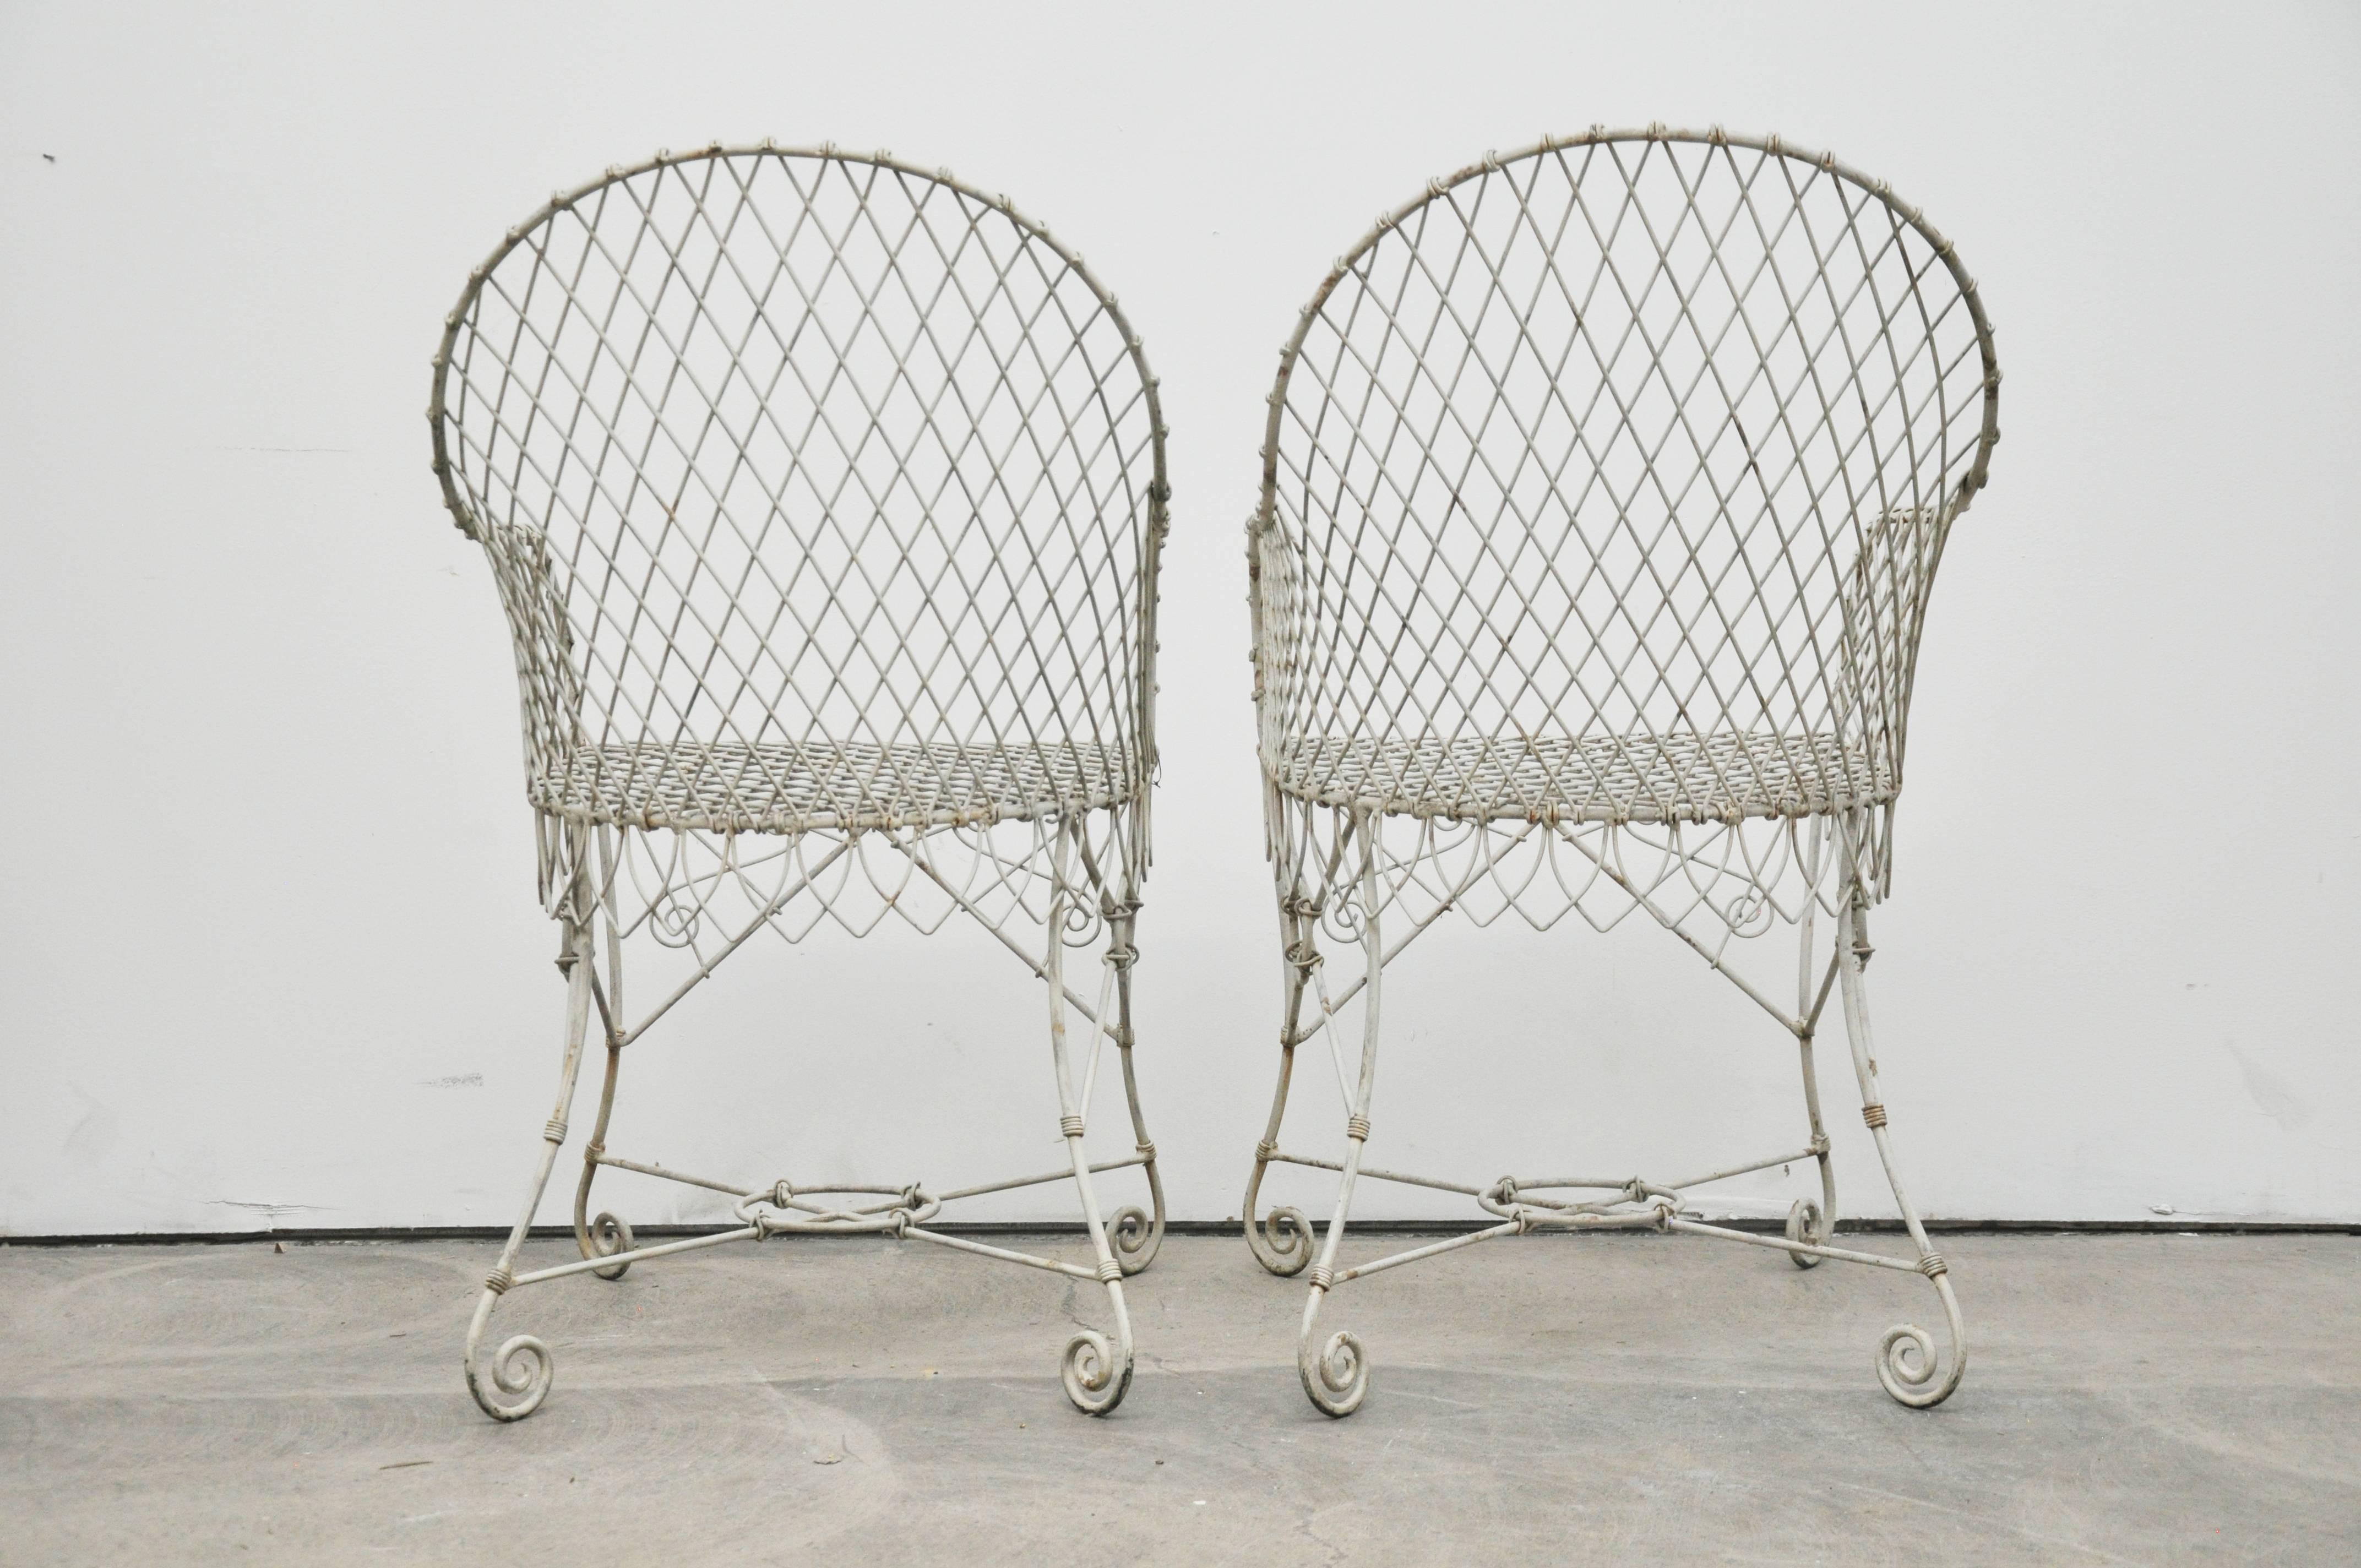 A pair of vintage 1920s French wire garden chairs. Wire painted white.

Measure: 17.5 seat height.